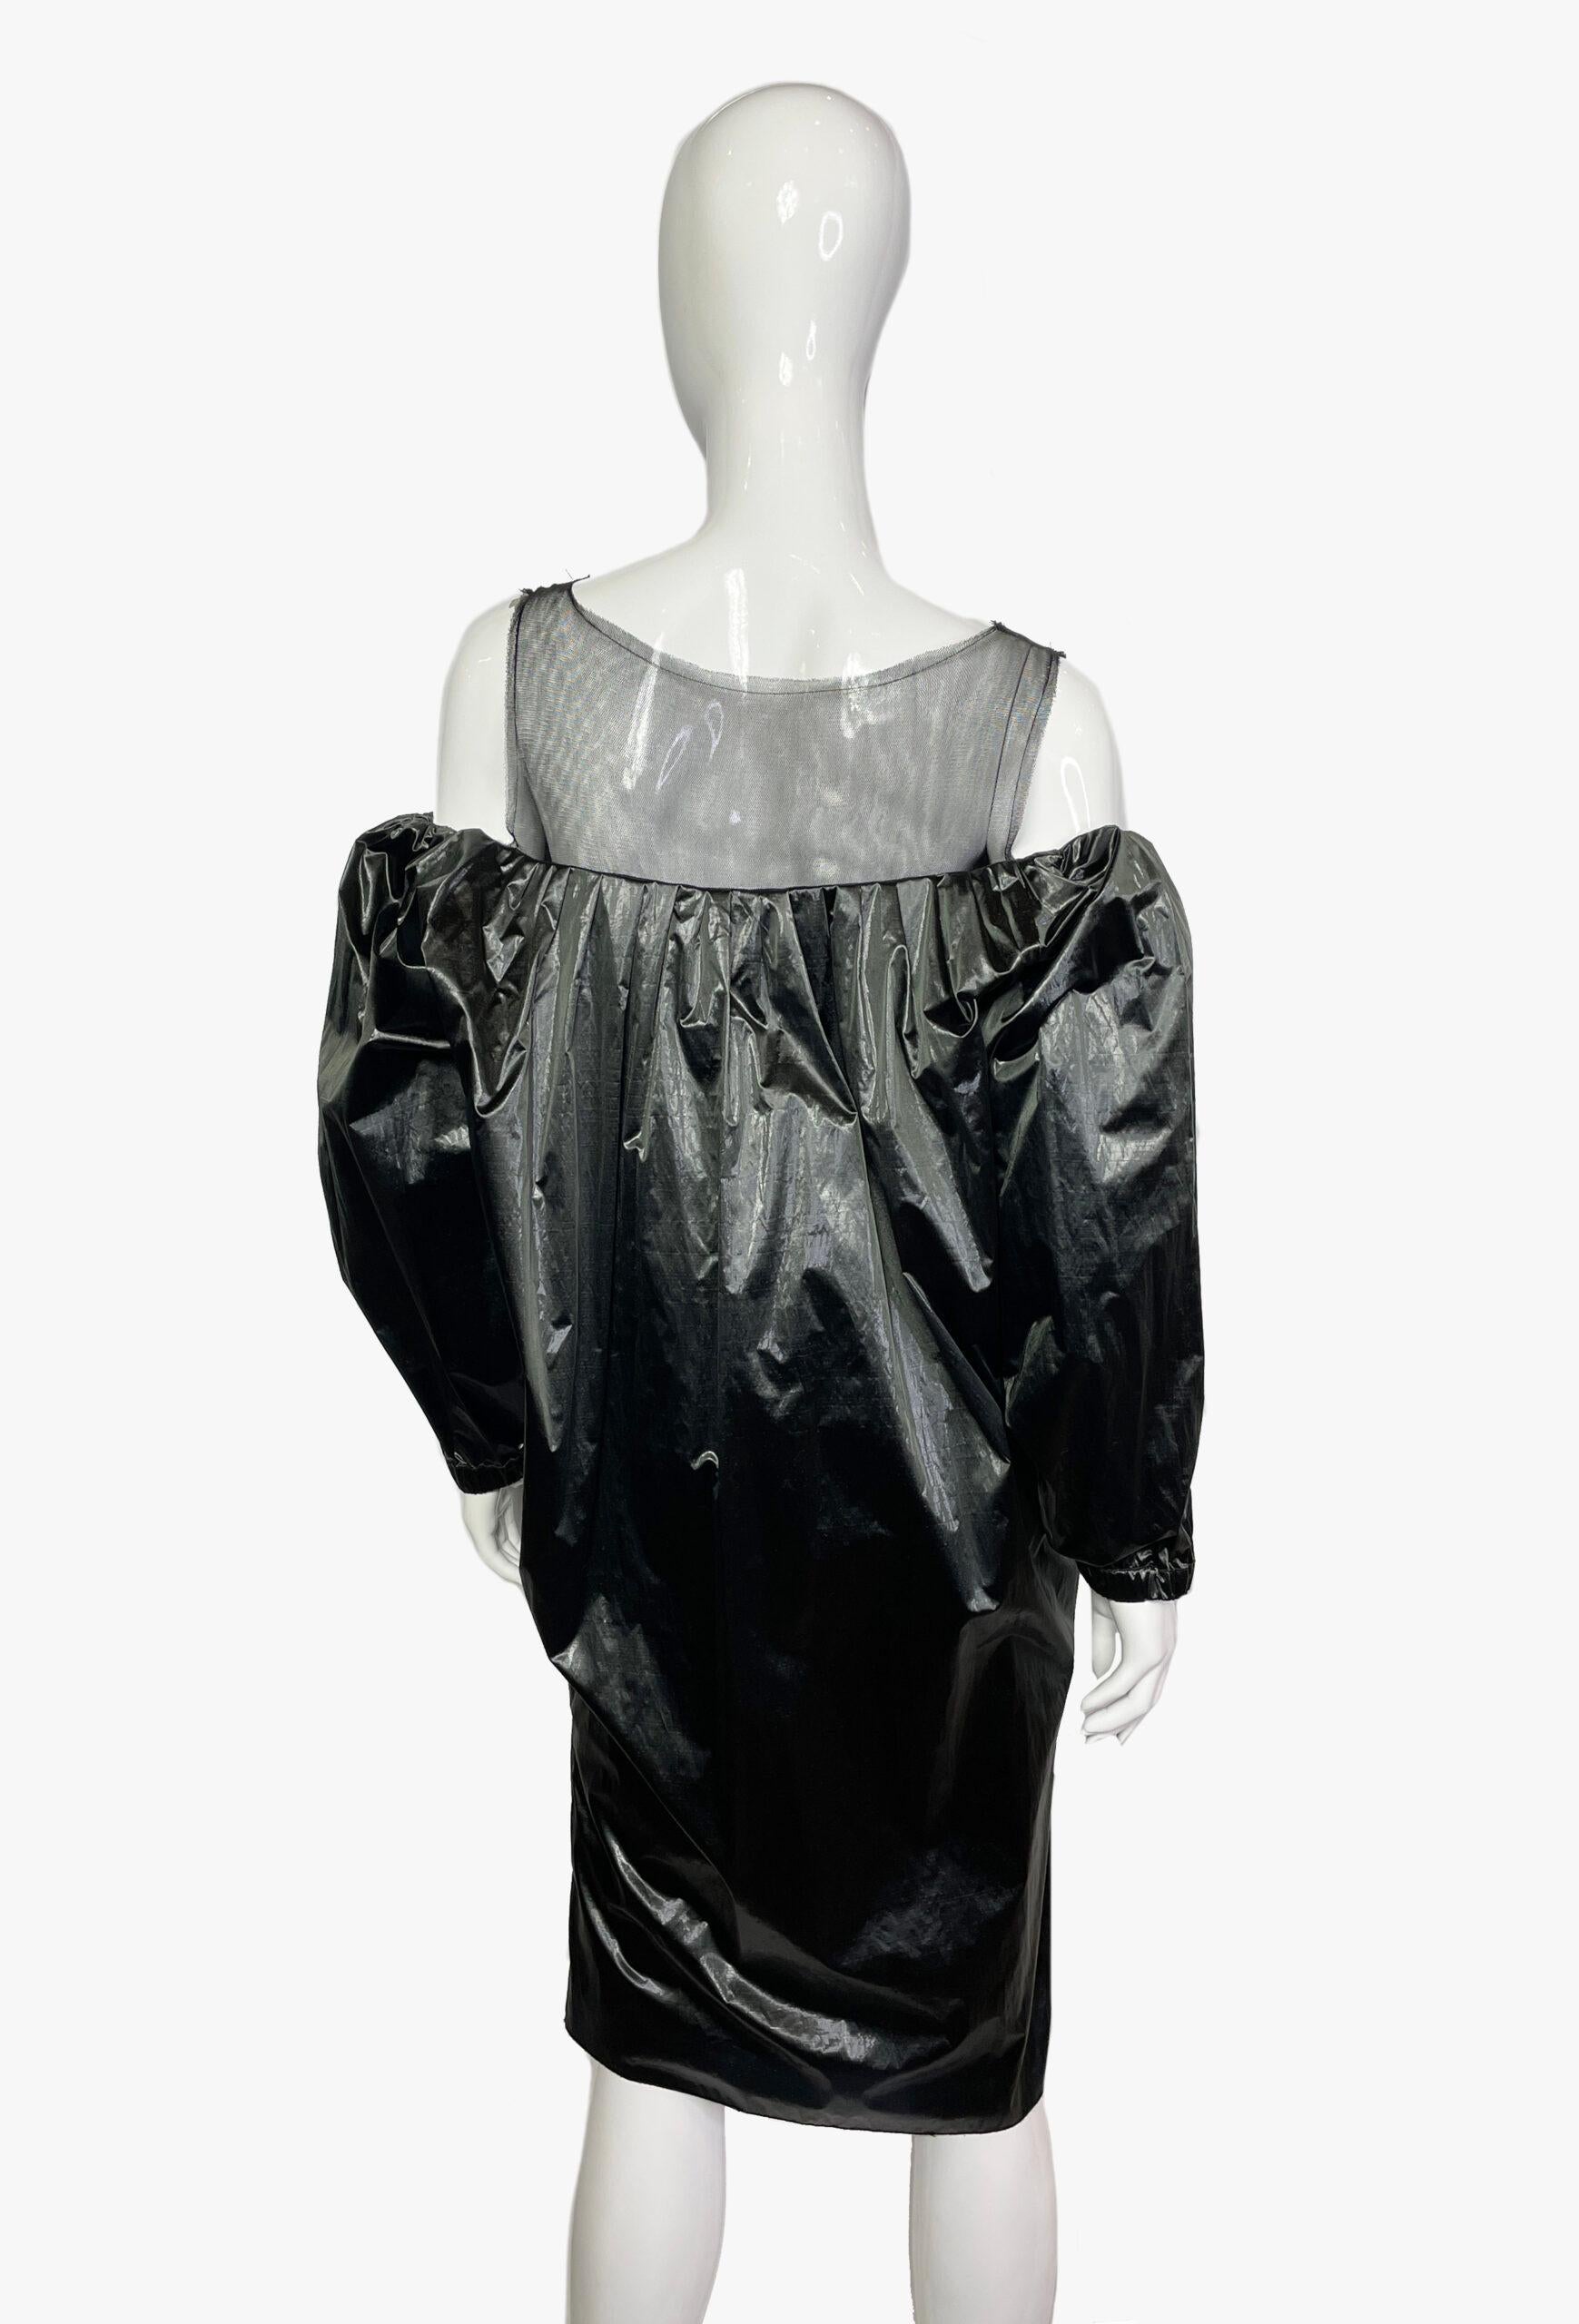 Lanvin Fururistic Evening Dress, 2008 In Good Condition For Sale In New York, NY